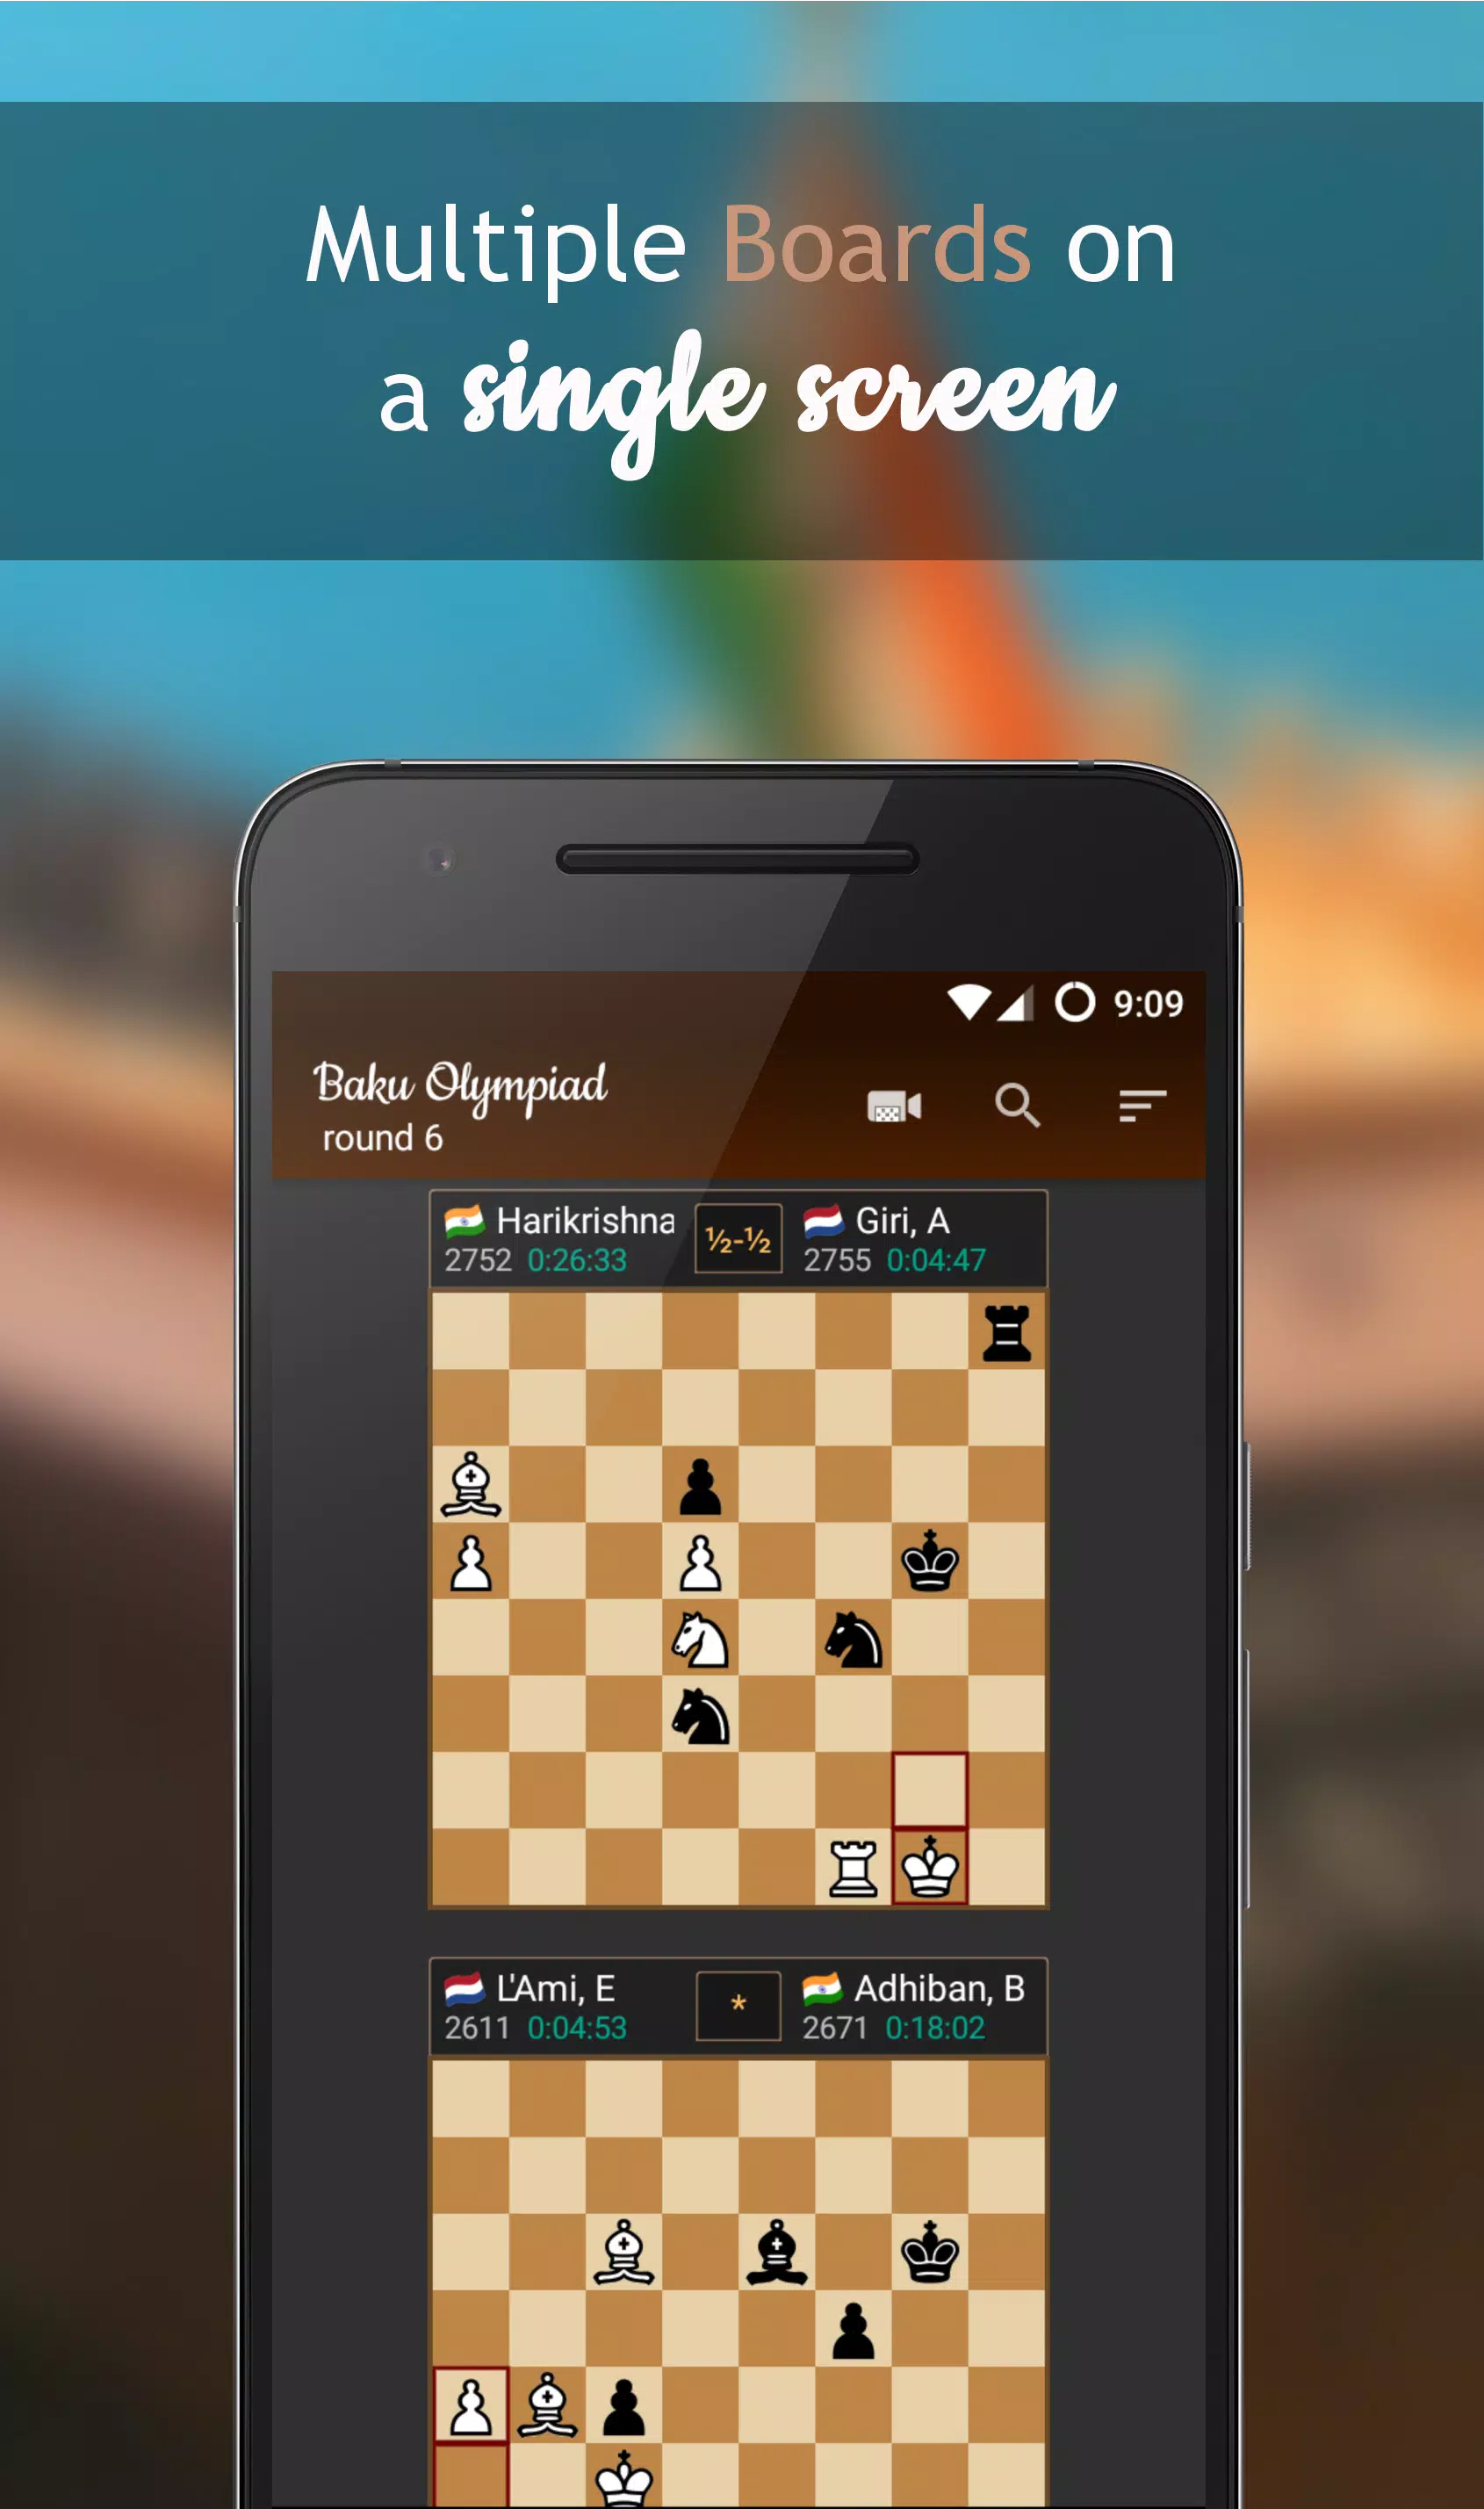 FollowChess APK (Android Game) - Free Download